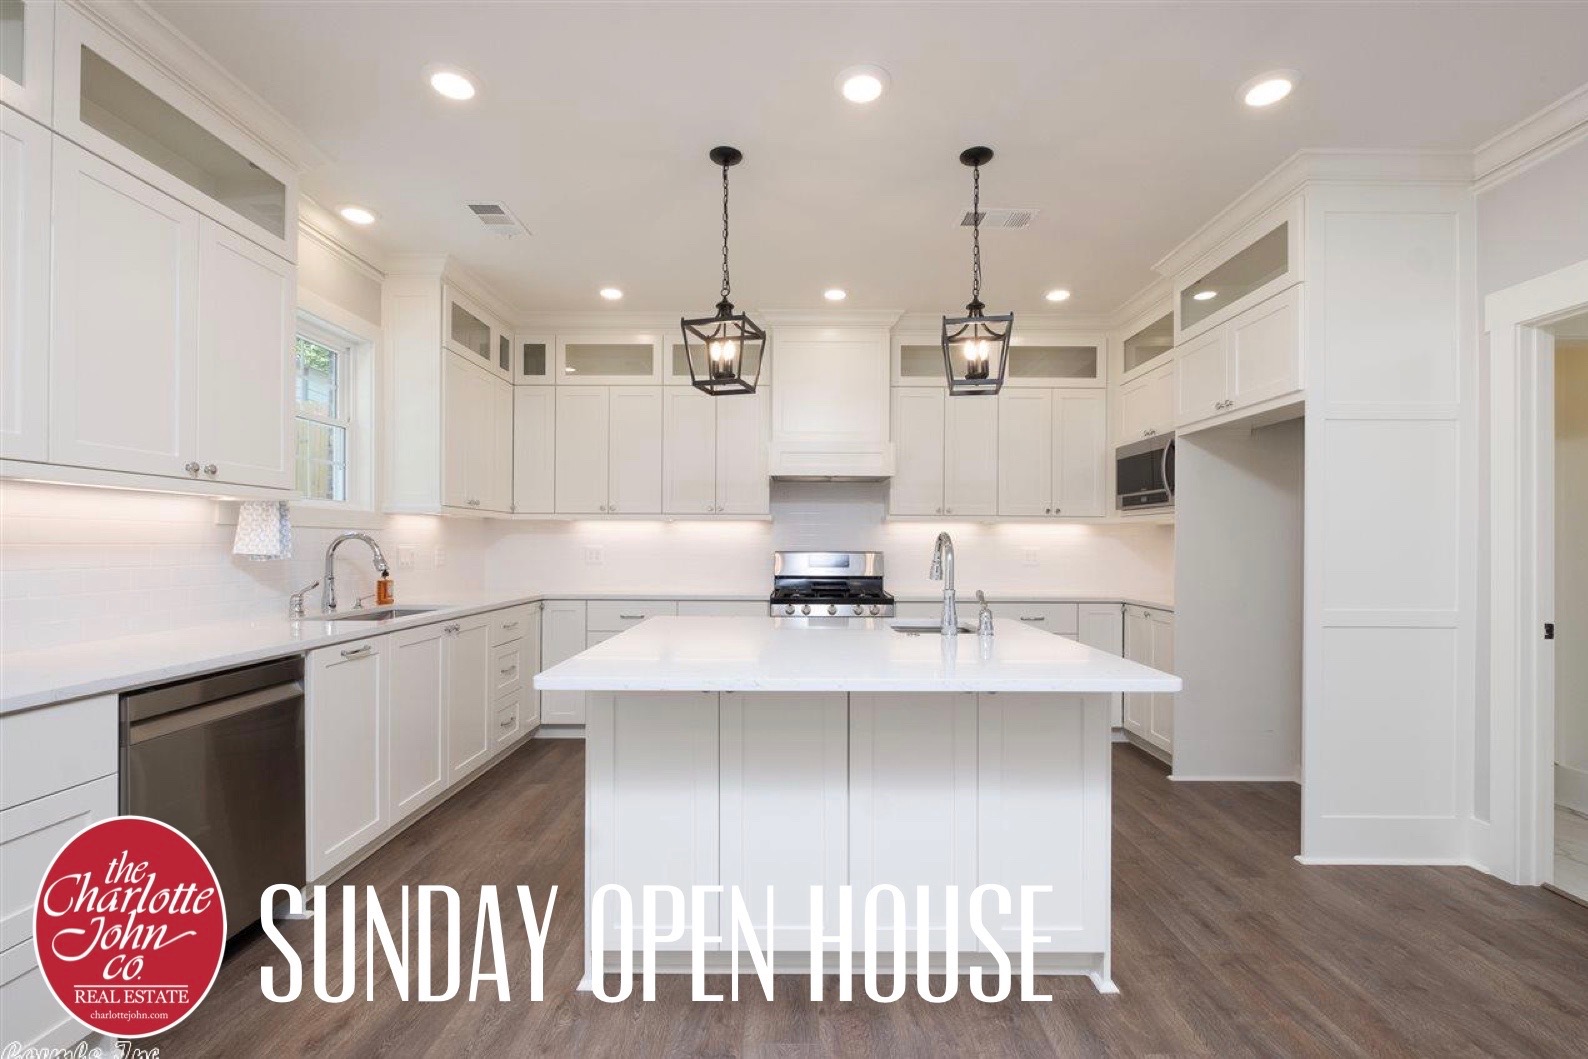 Sunday Open House October 4th